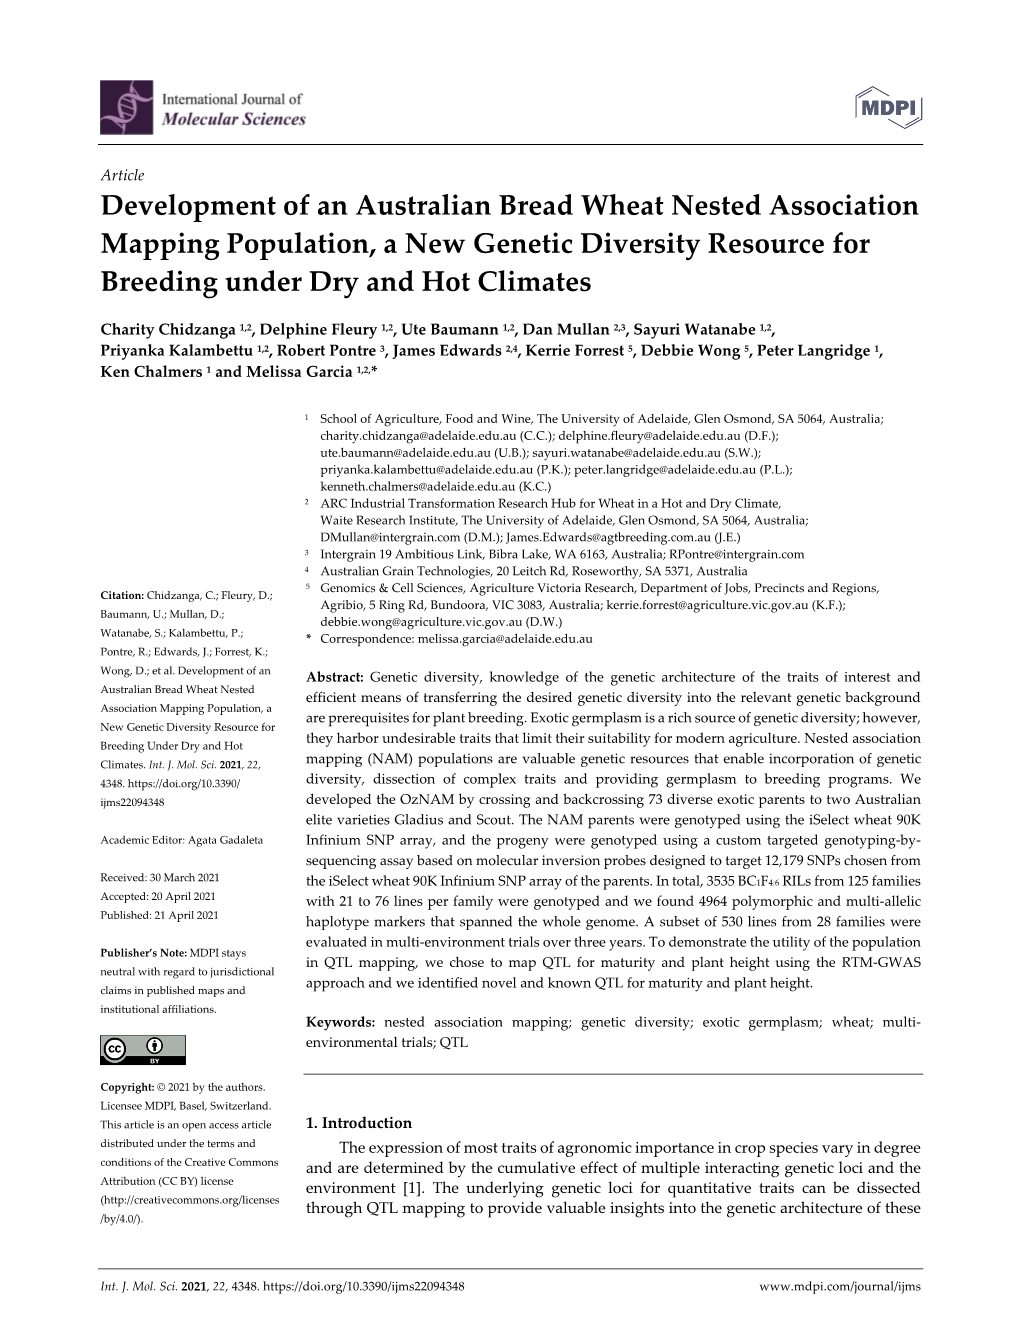 Development of an Australian Bread Wheat Nested Association Mapping Population, a New Genetic Diversity Resource for Breeding Under Dry and Hot Climates